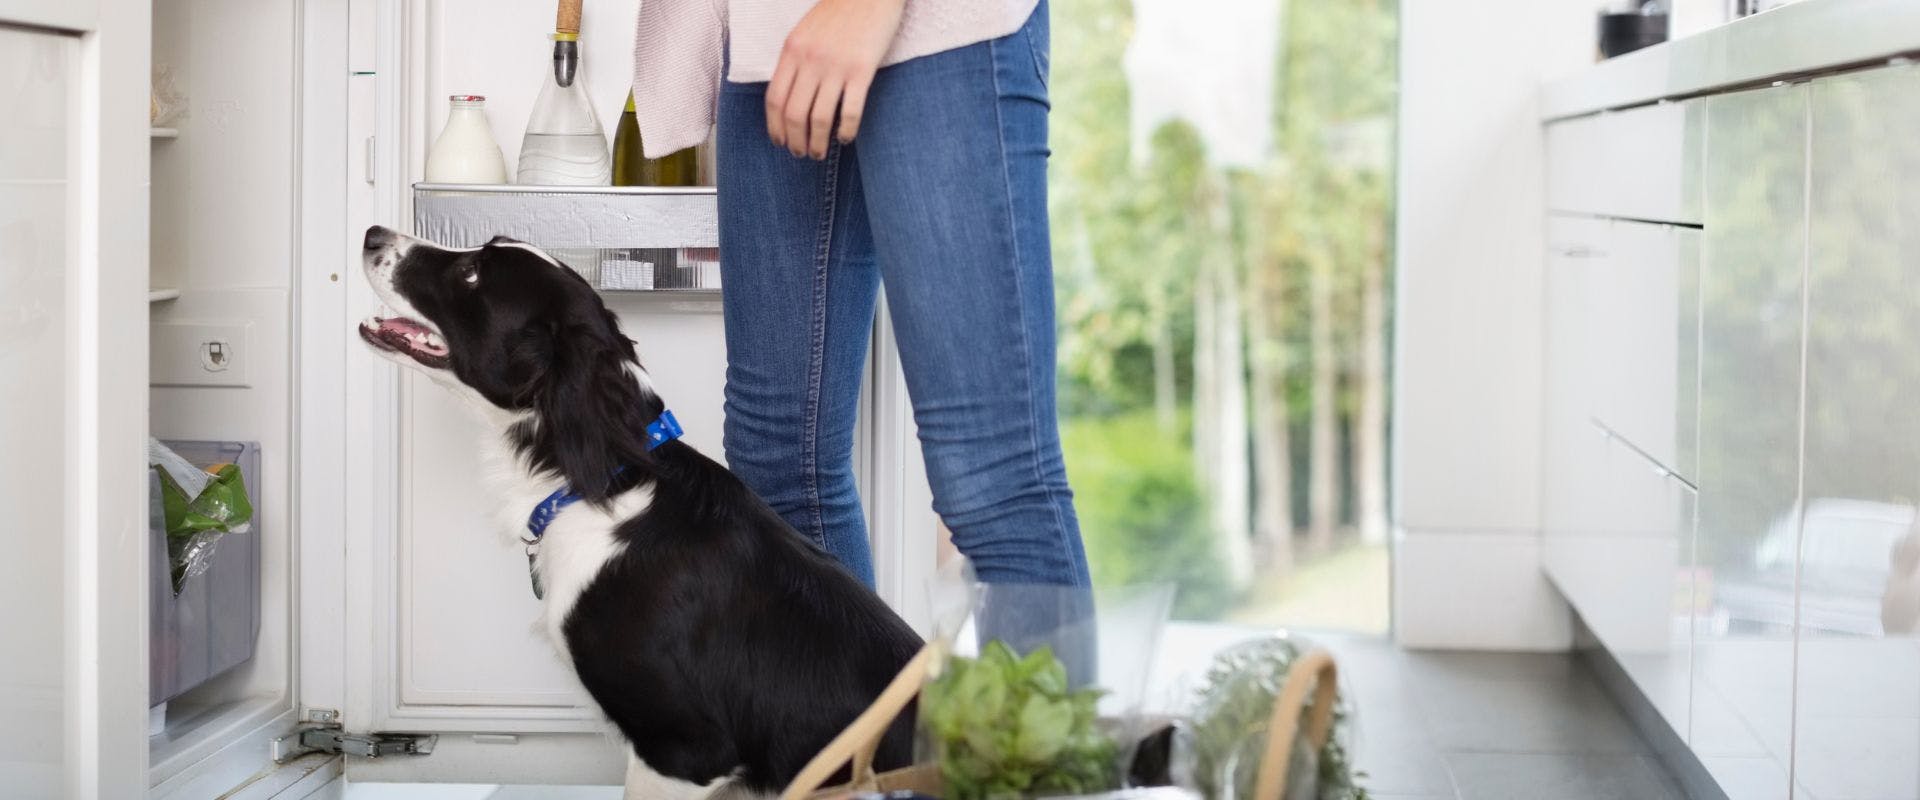 Border Collie dog waiting at the fridge with owner